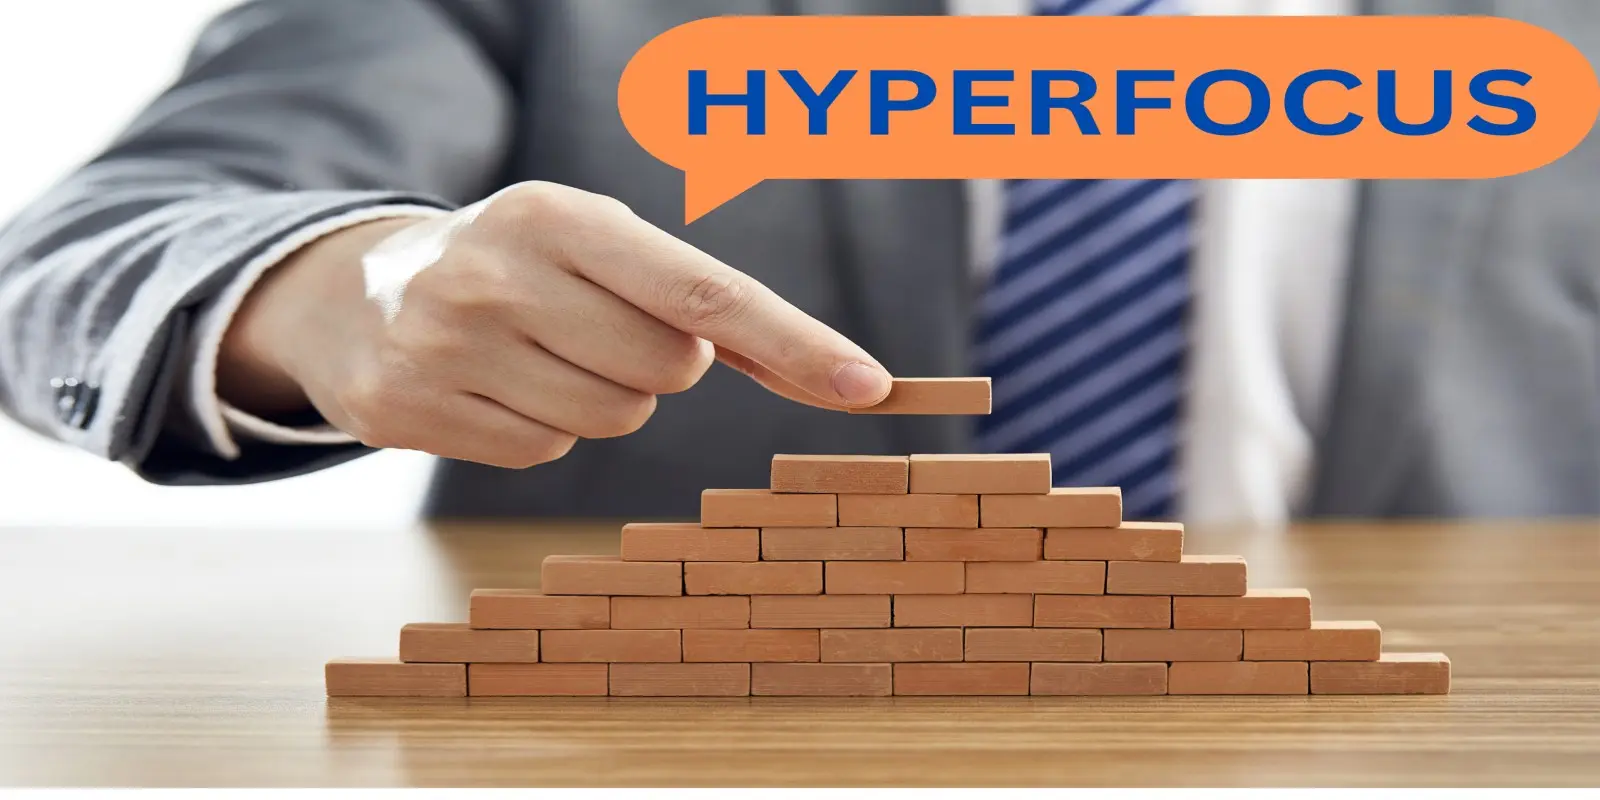 What Do You Know About Hyperfocus?